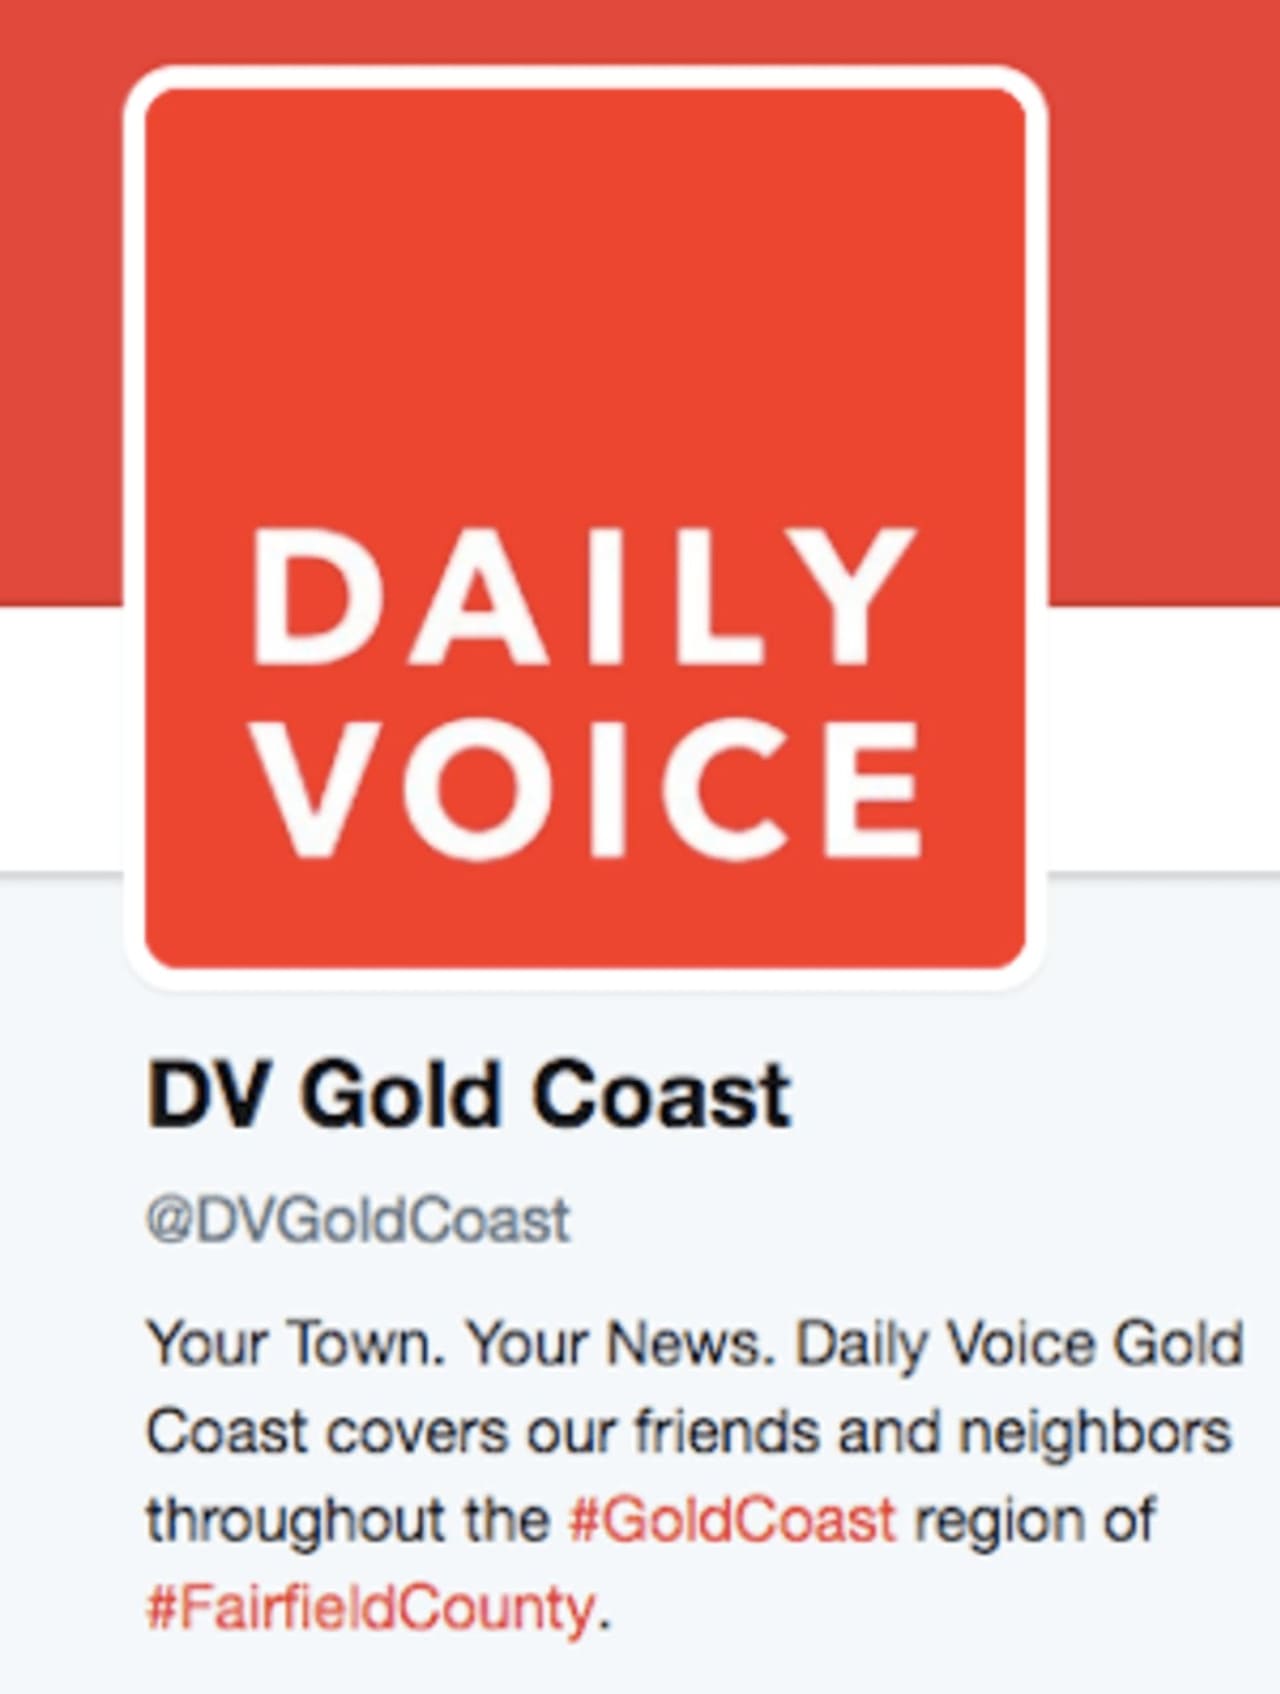 Follow us on Twitter at @DVGoldCoast for the latest news from southern Fairfield County.